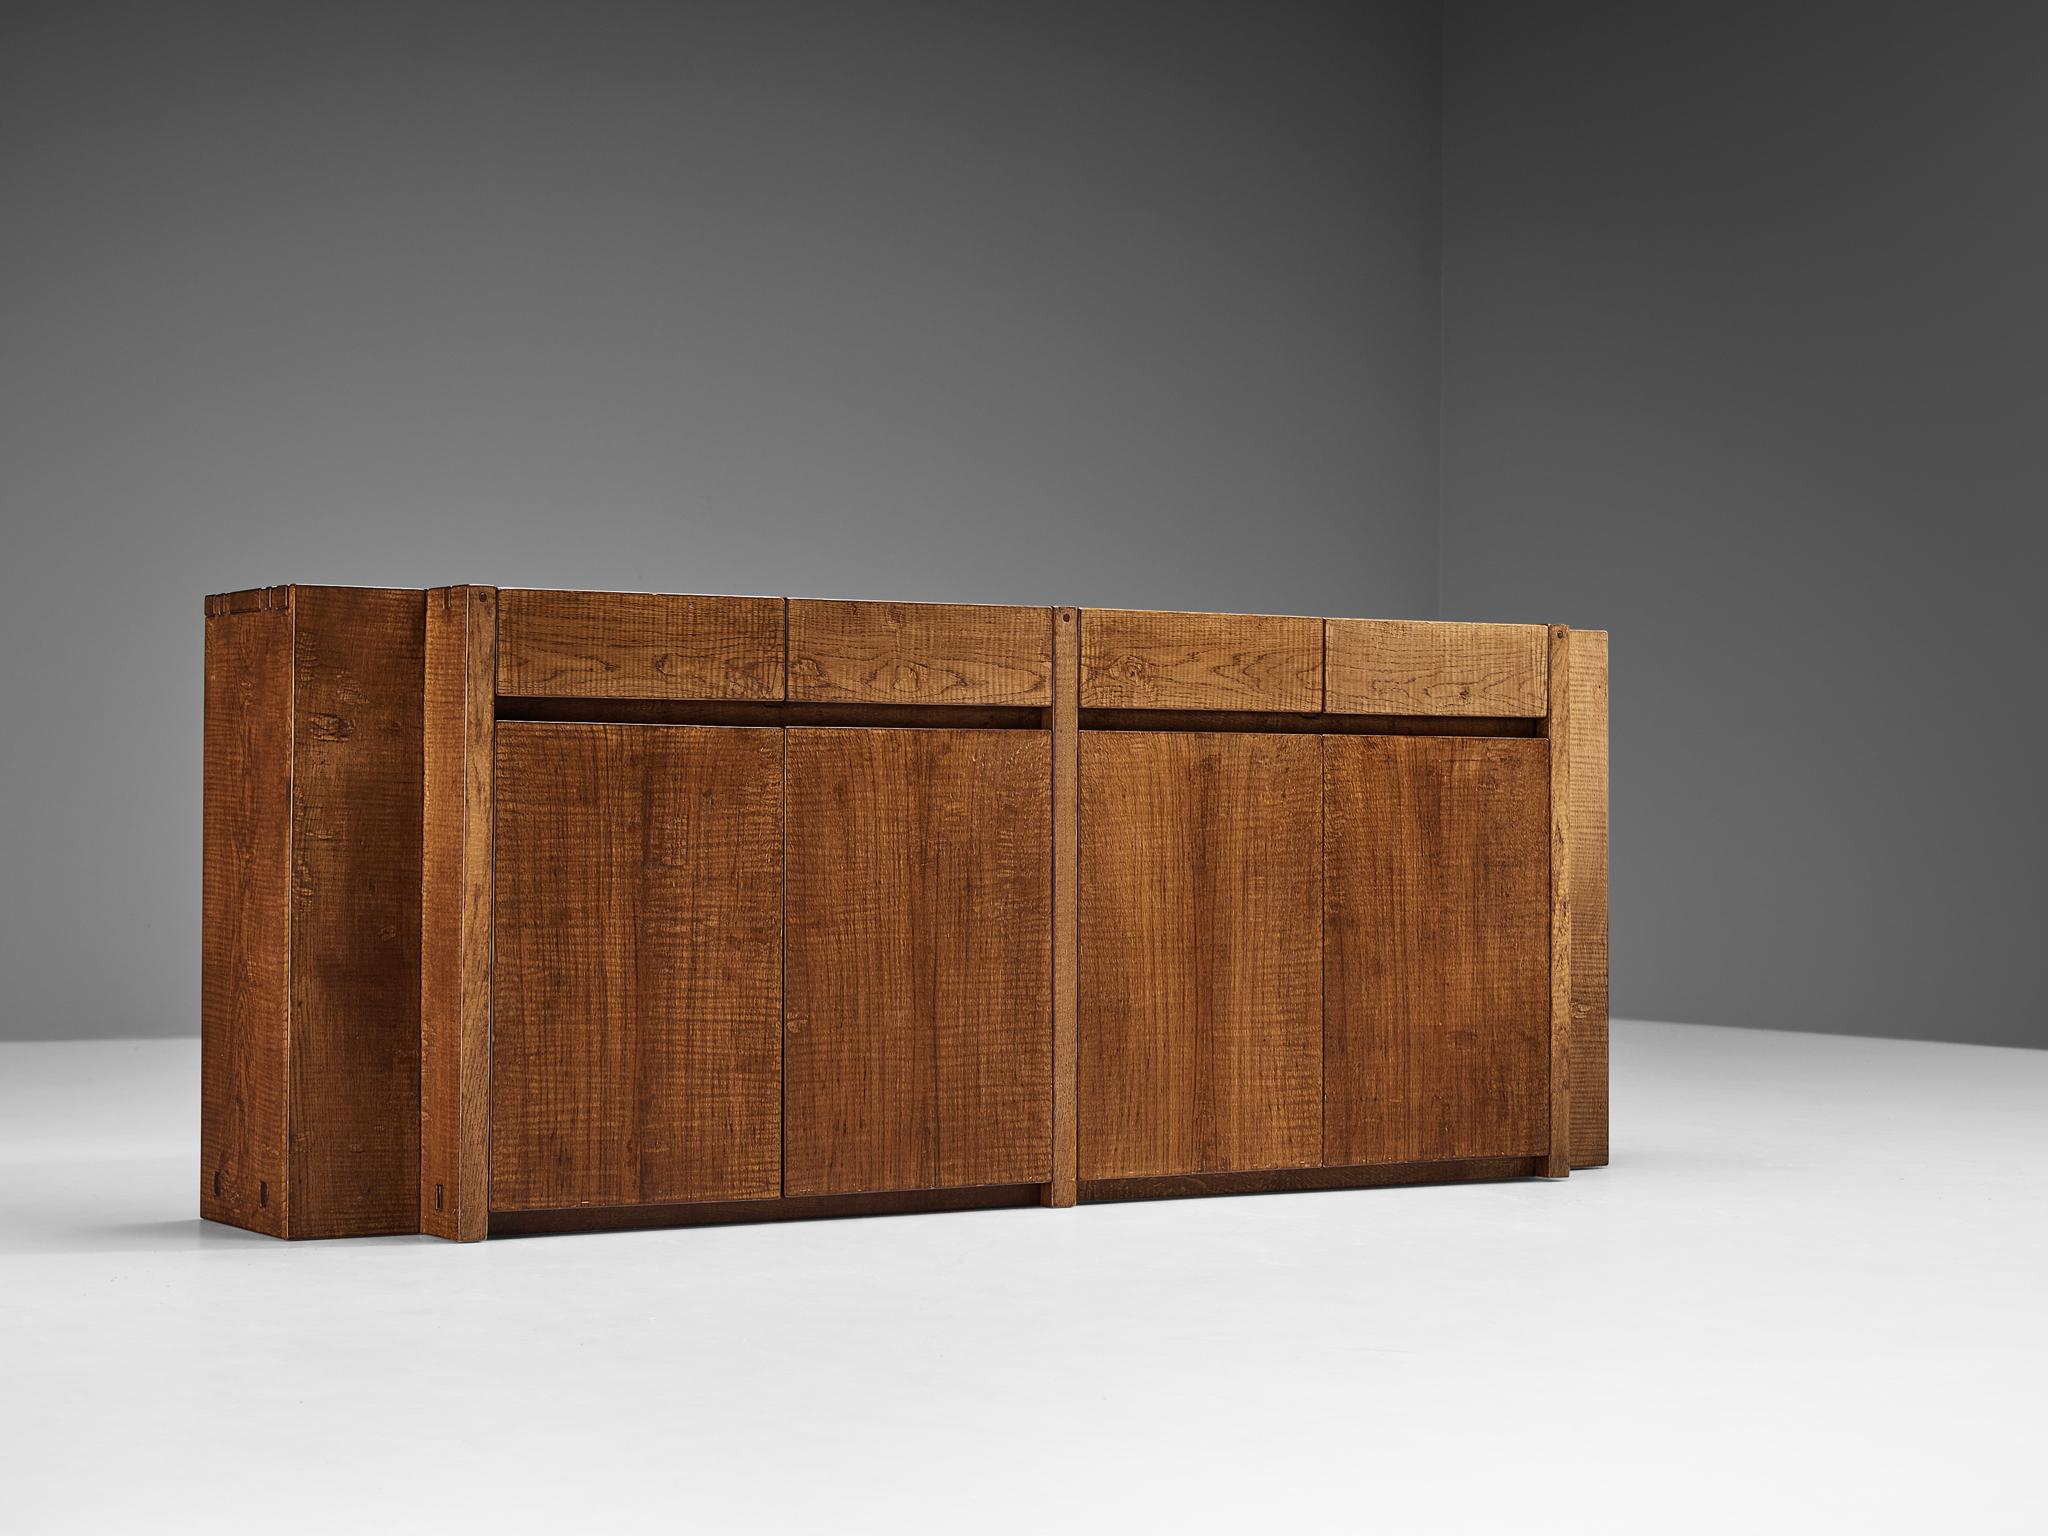 Giuseppe Rivadossi for Officina Rivadossi, sideboard, oak, Italy, 1980s.

Giuseppe Rivadossi once again proves his great eye for materialization and technicality that this design is exemplary for. The sideboard is constructed using wooden panels